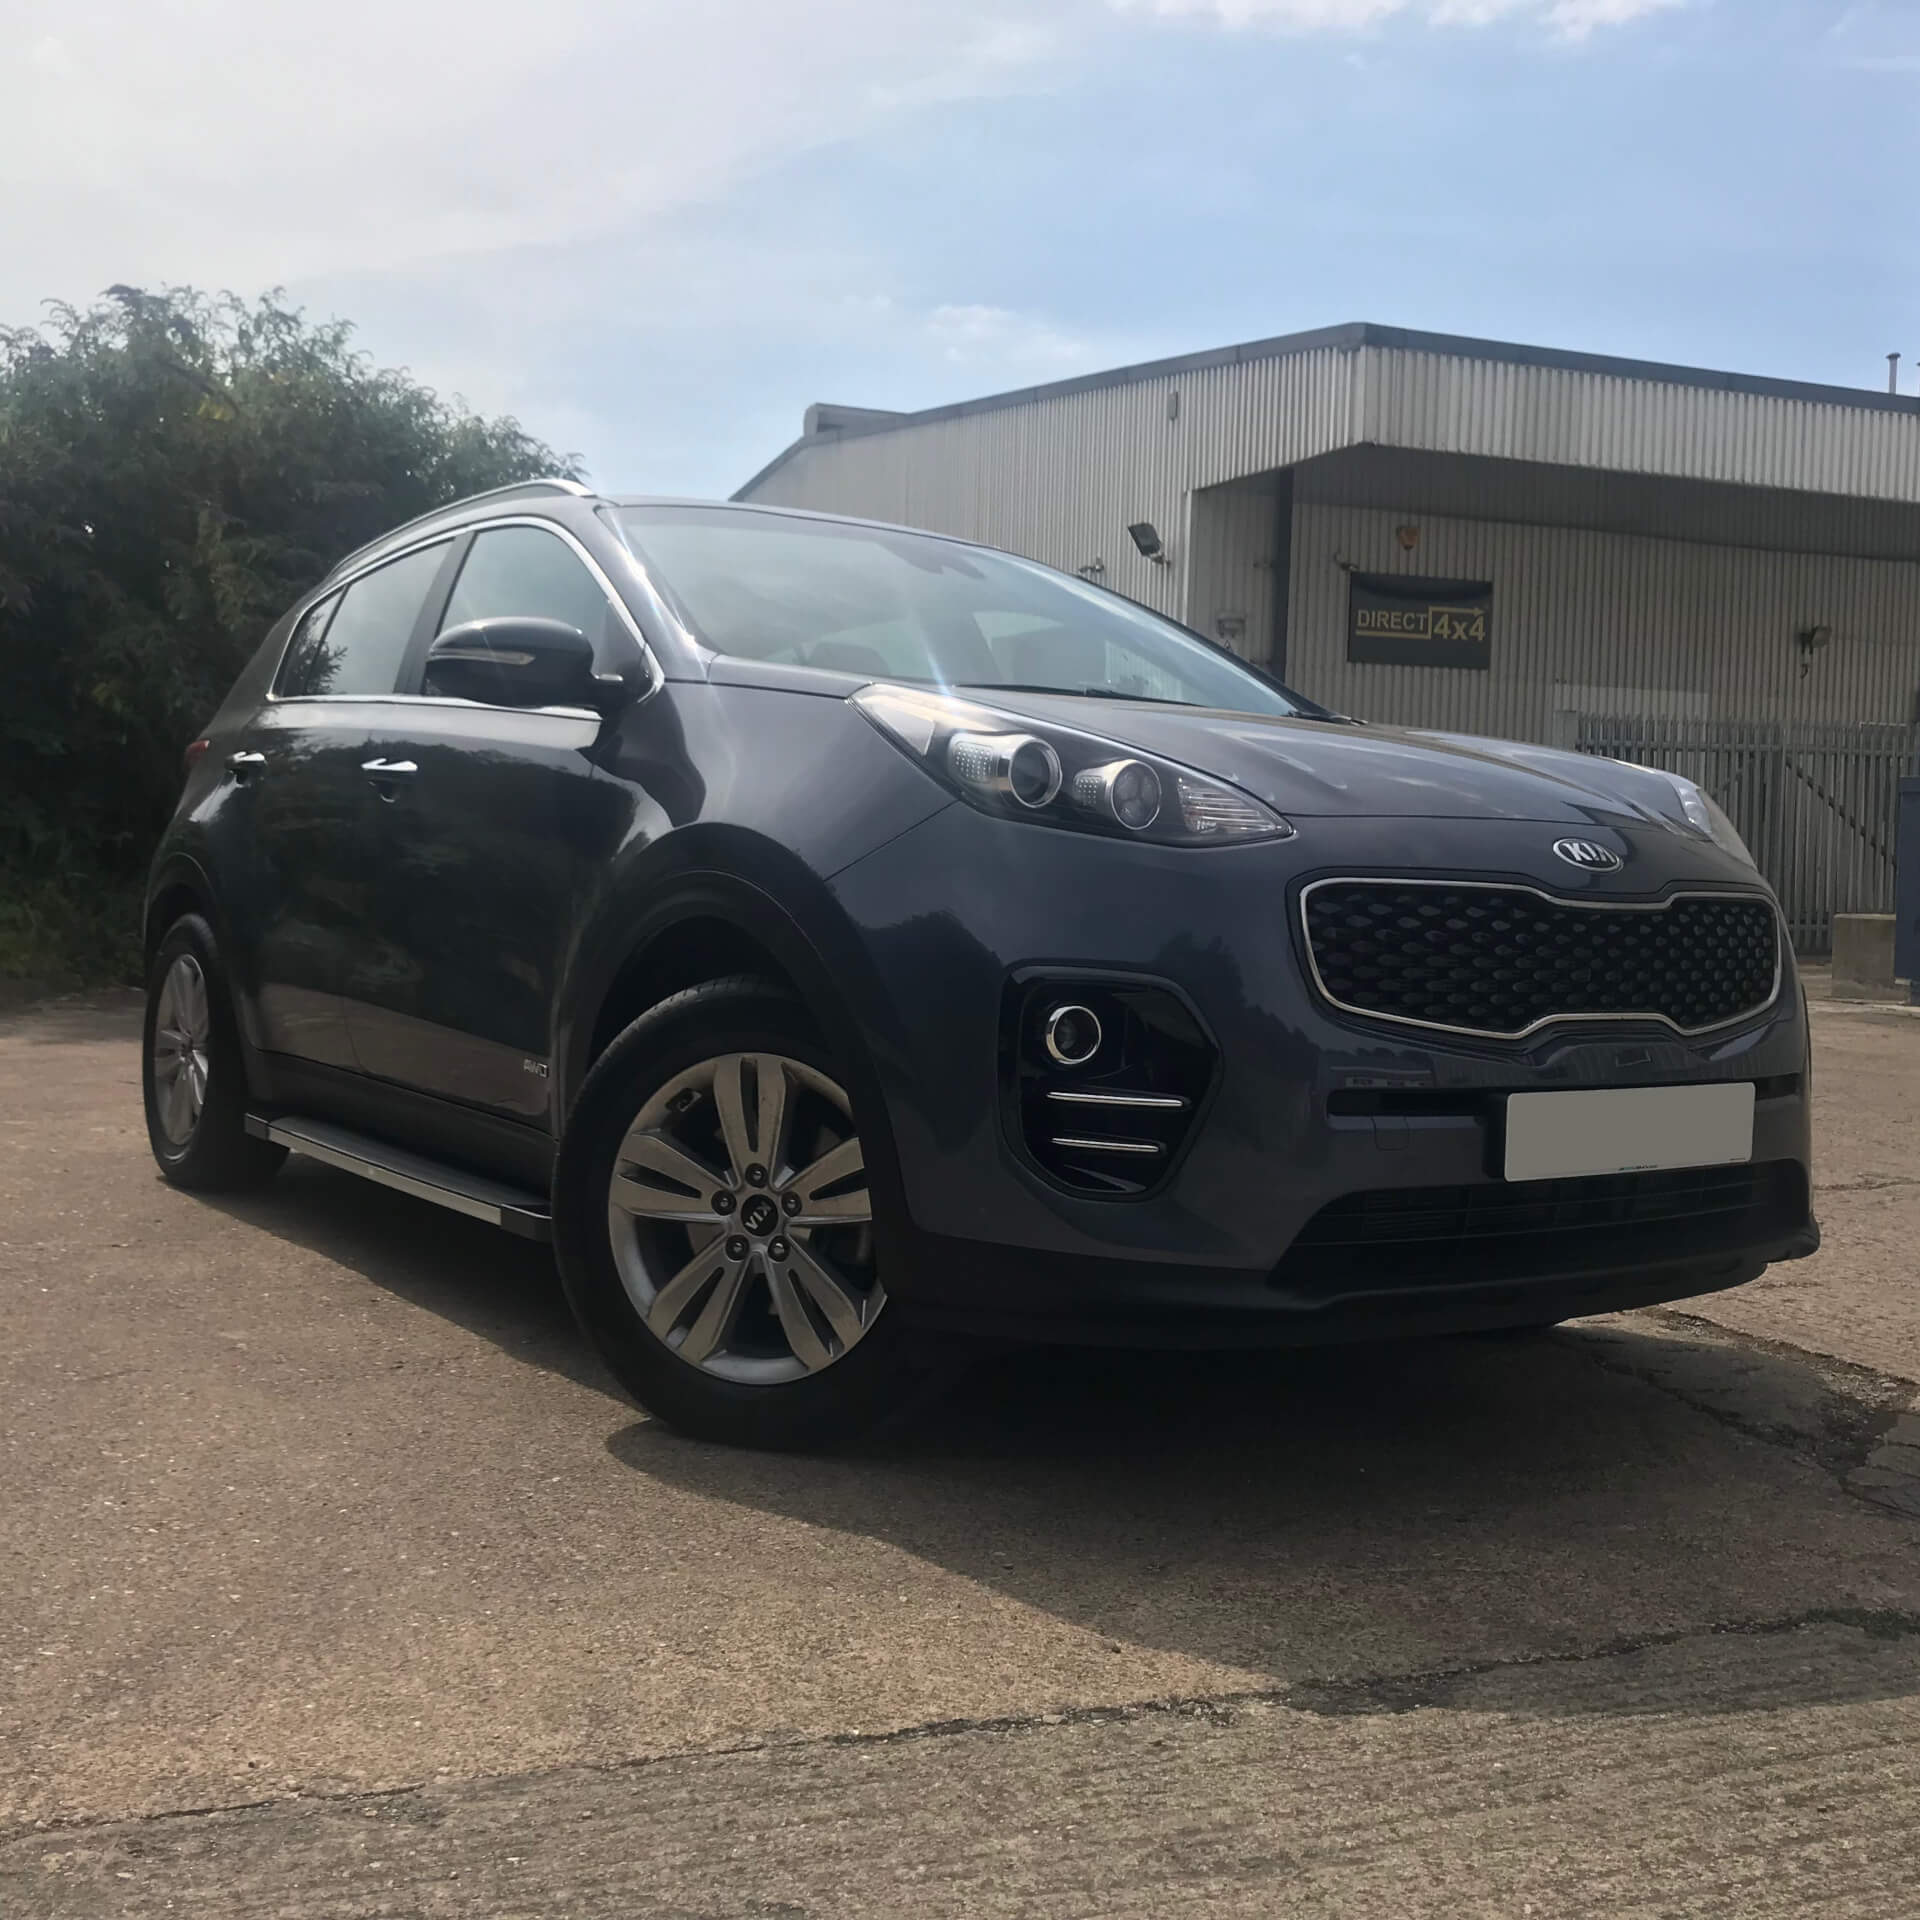 Direct4x4 accessories for Kia Sportage vehicles with a photo of a dark grey Kia Sportage fitted with side steps parked in the sunshine at out offices